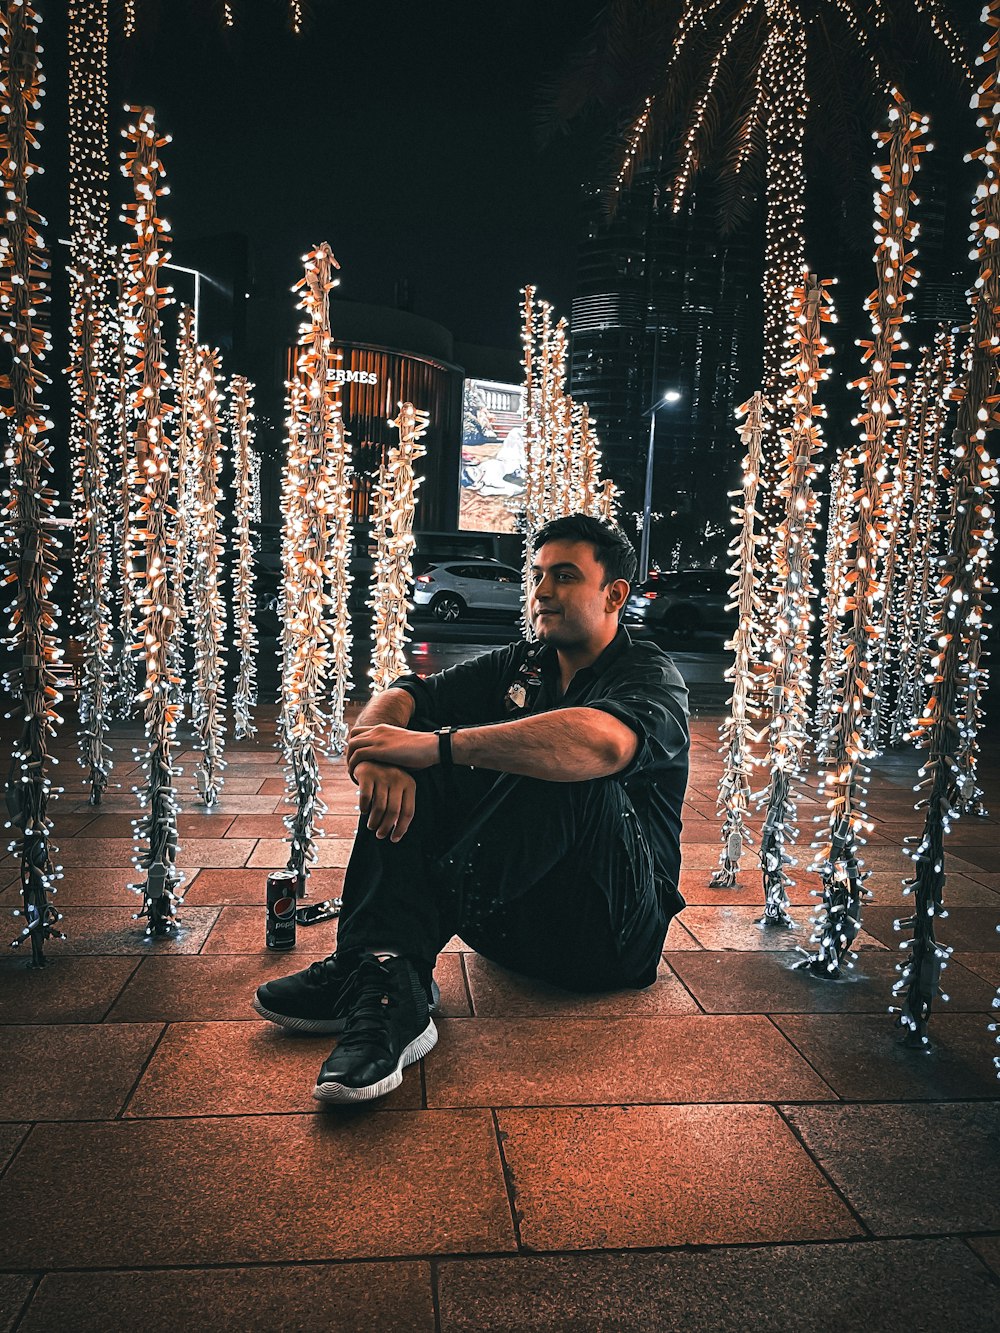 a man squatting on a sidewalk with lights on the side